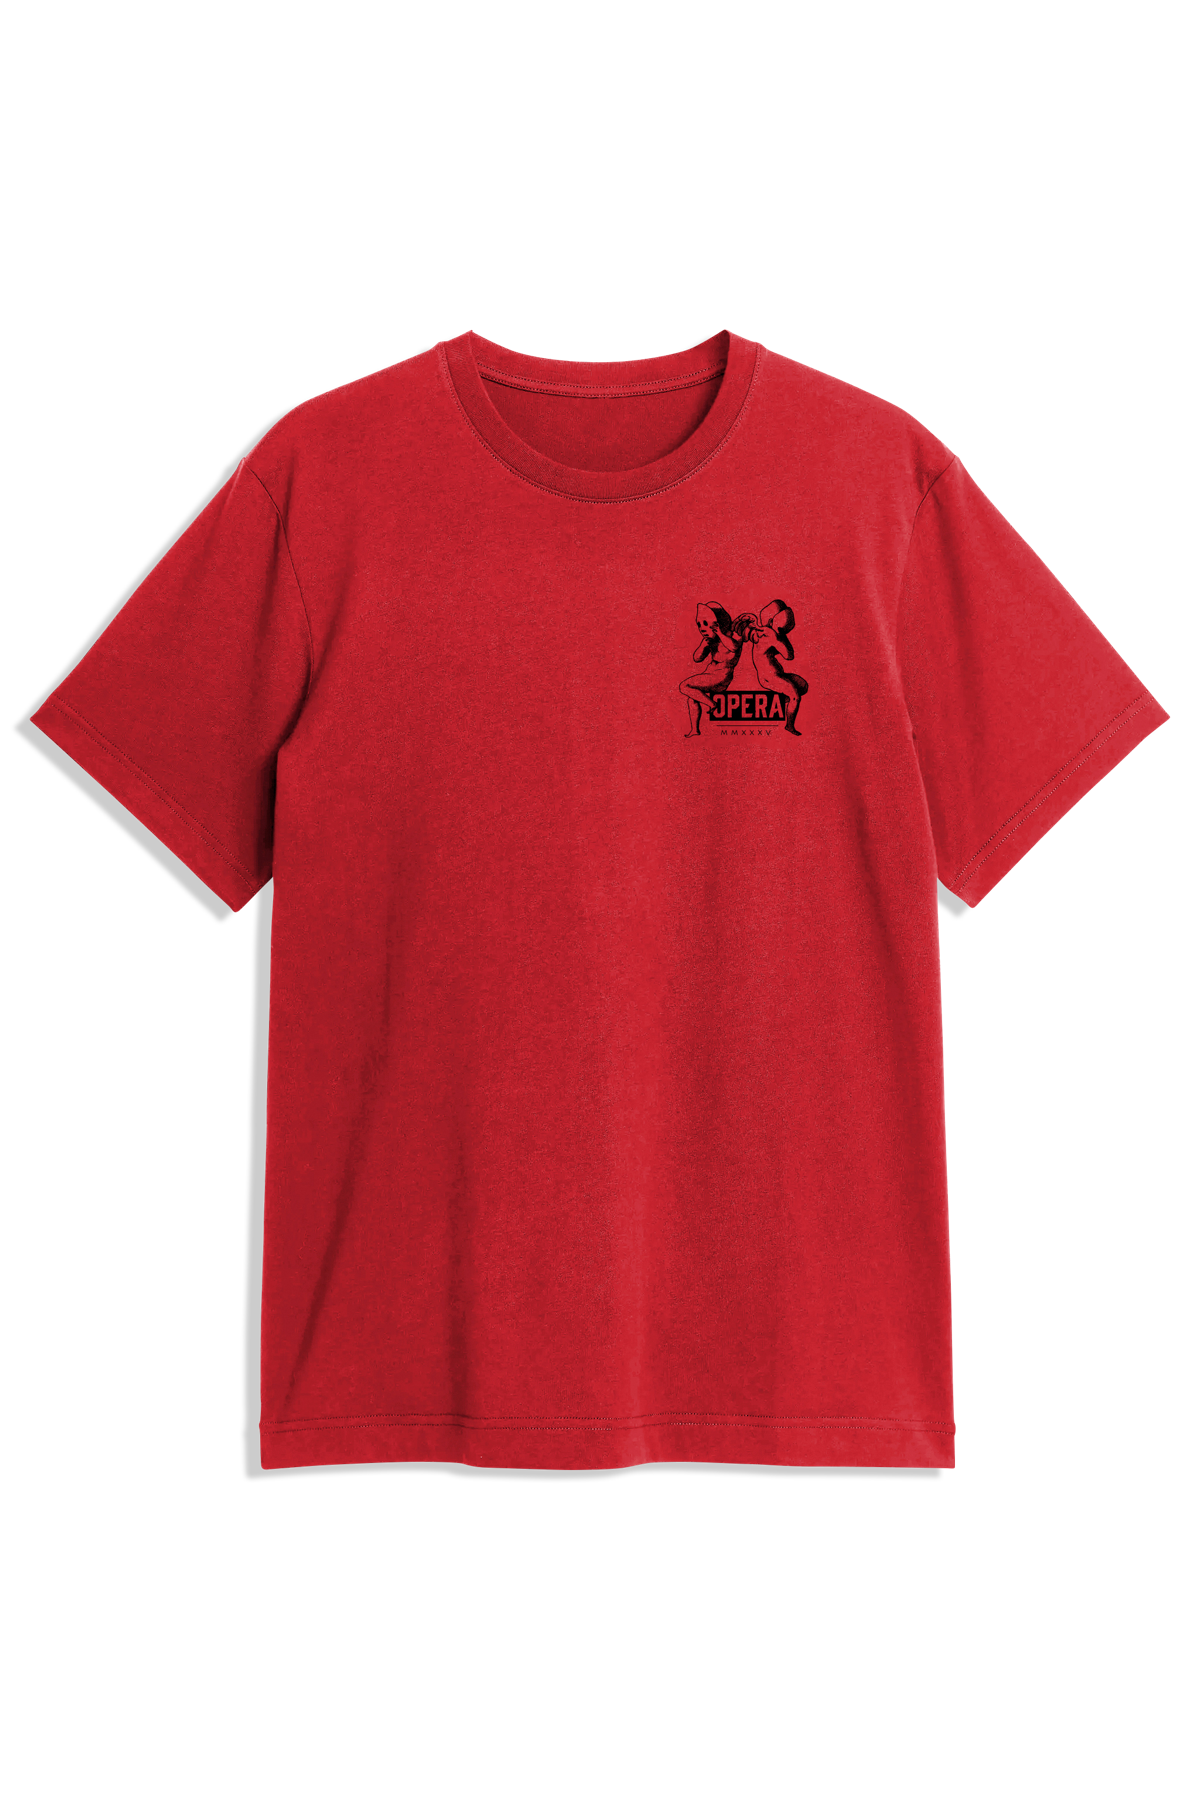 Angels S/S Tee - Antique Cherry Red